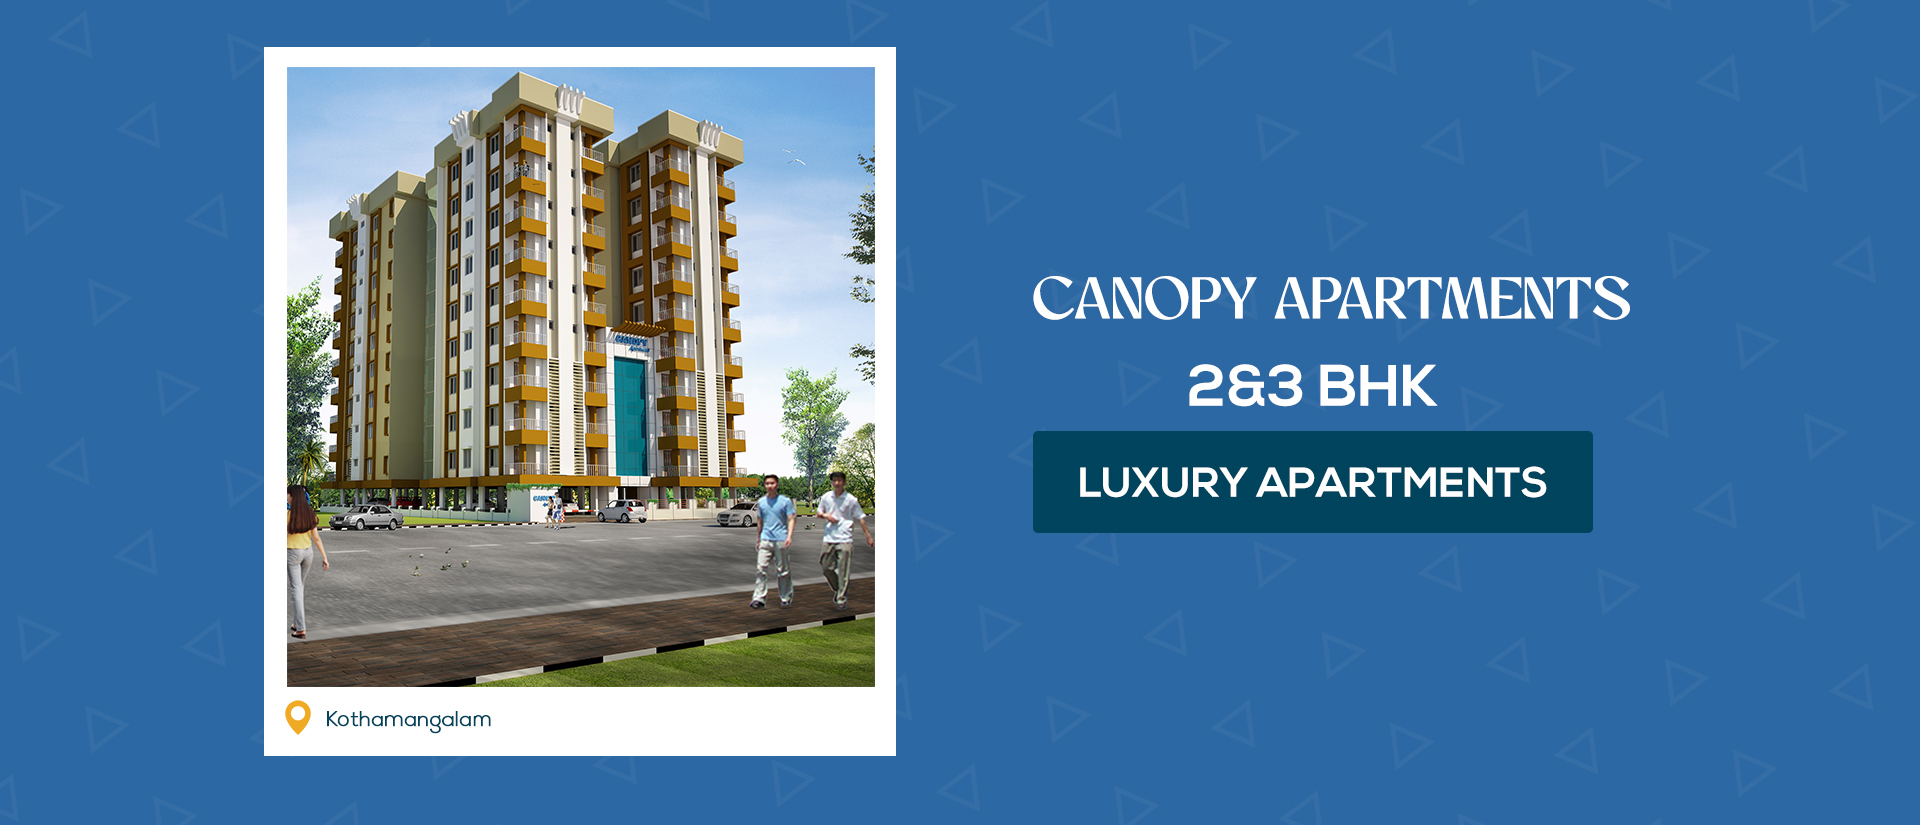 home-canopy apartments 2&3 bhk